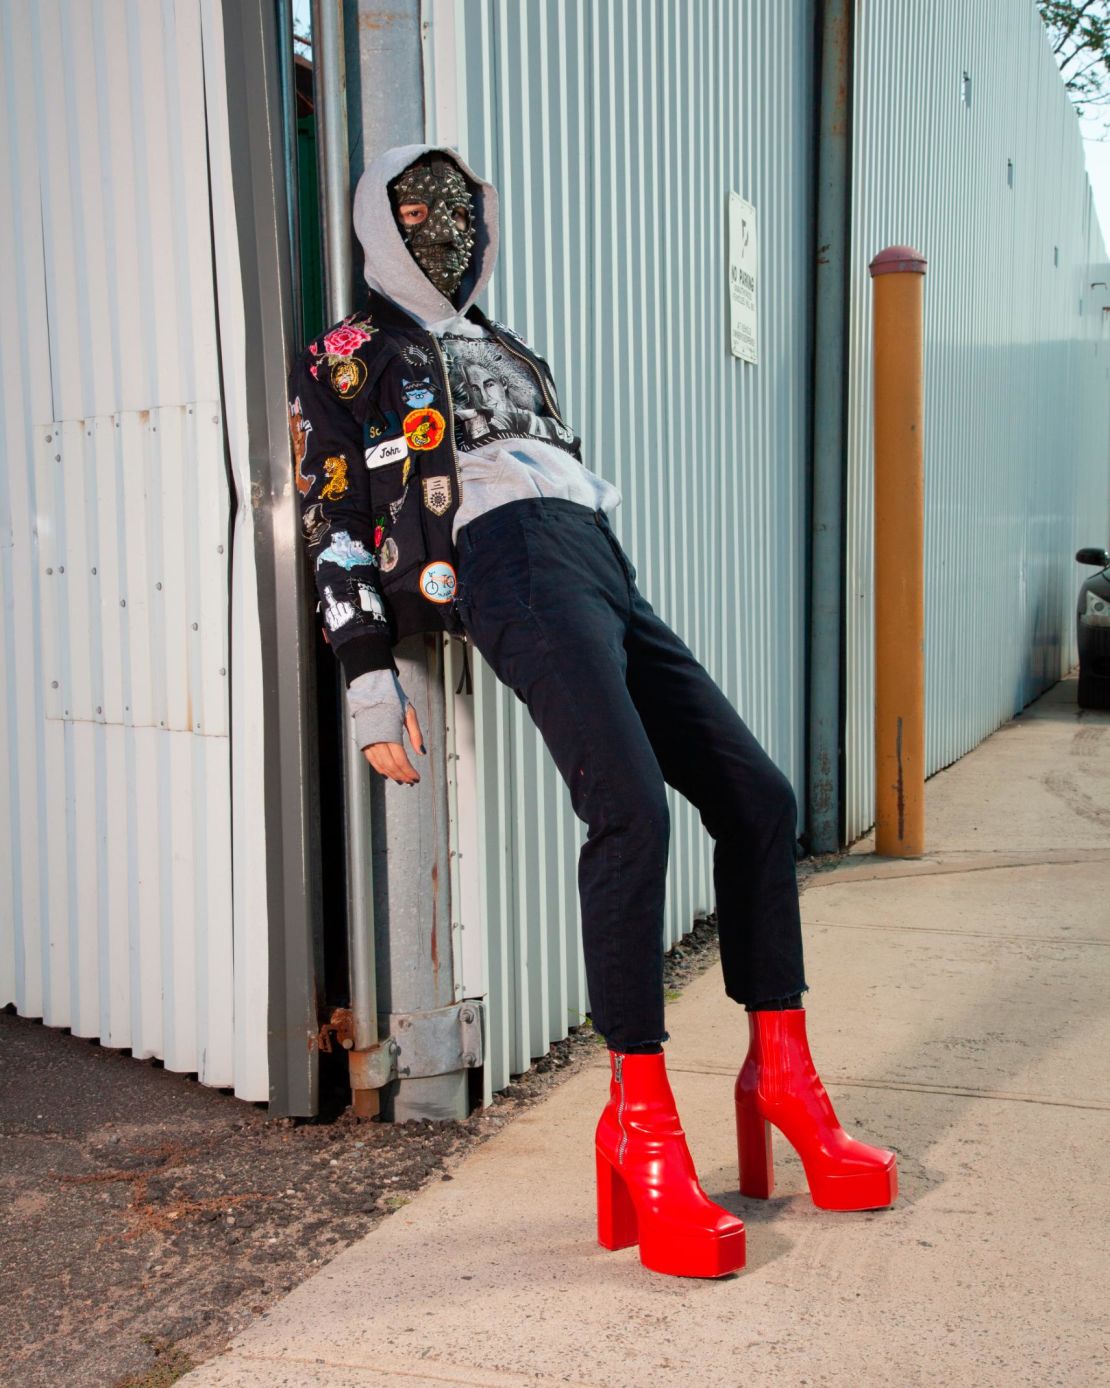 A model wearing a pair of red Syro platform boots, which sold out "almost immediately" according to co-founder Shaobo Han.